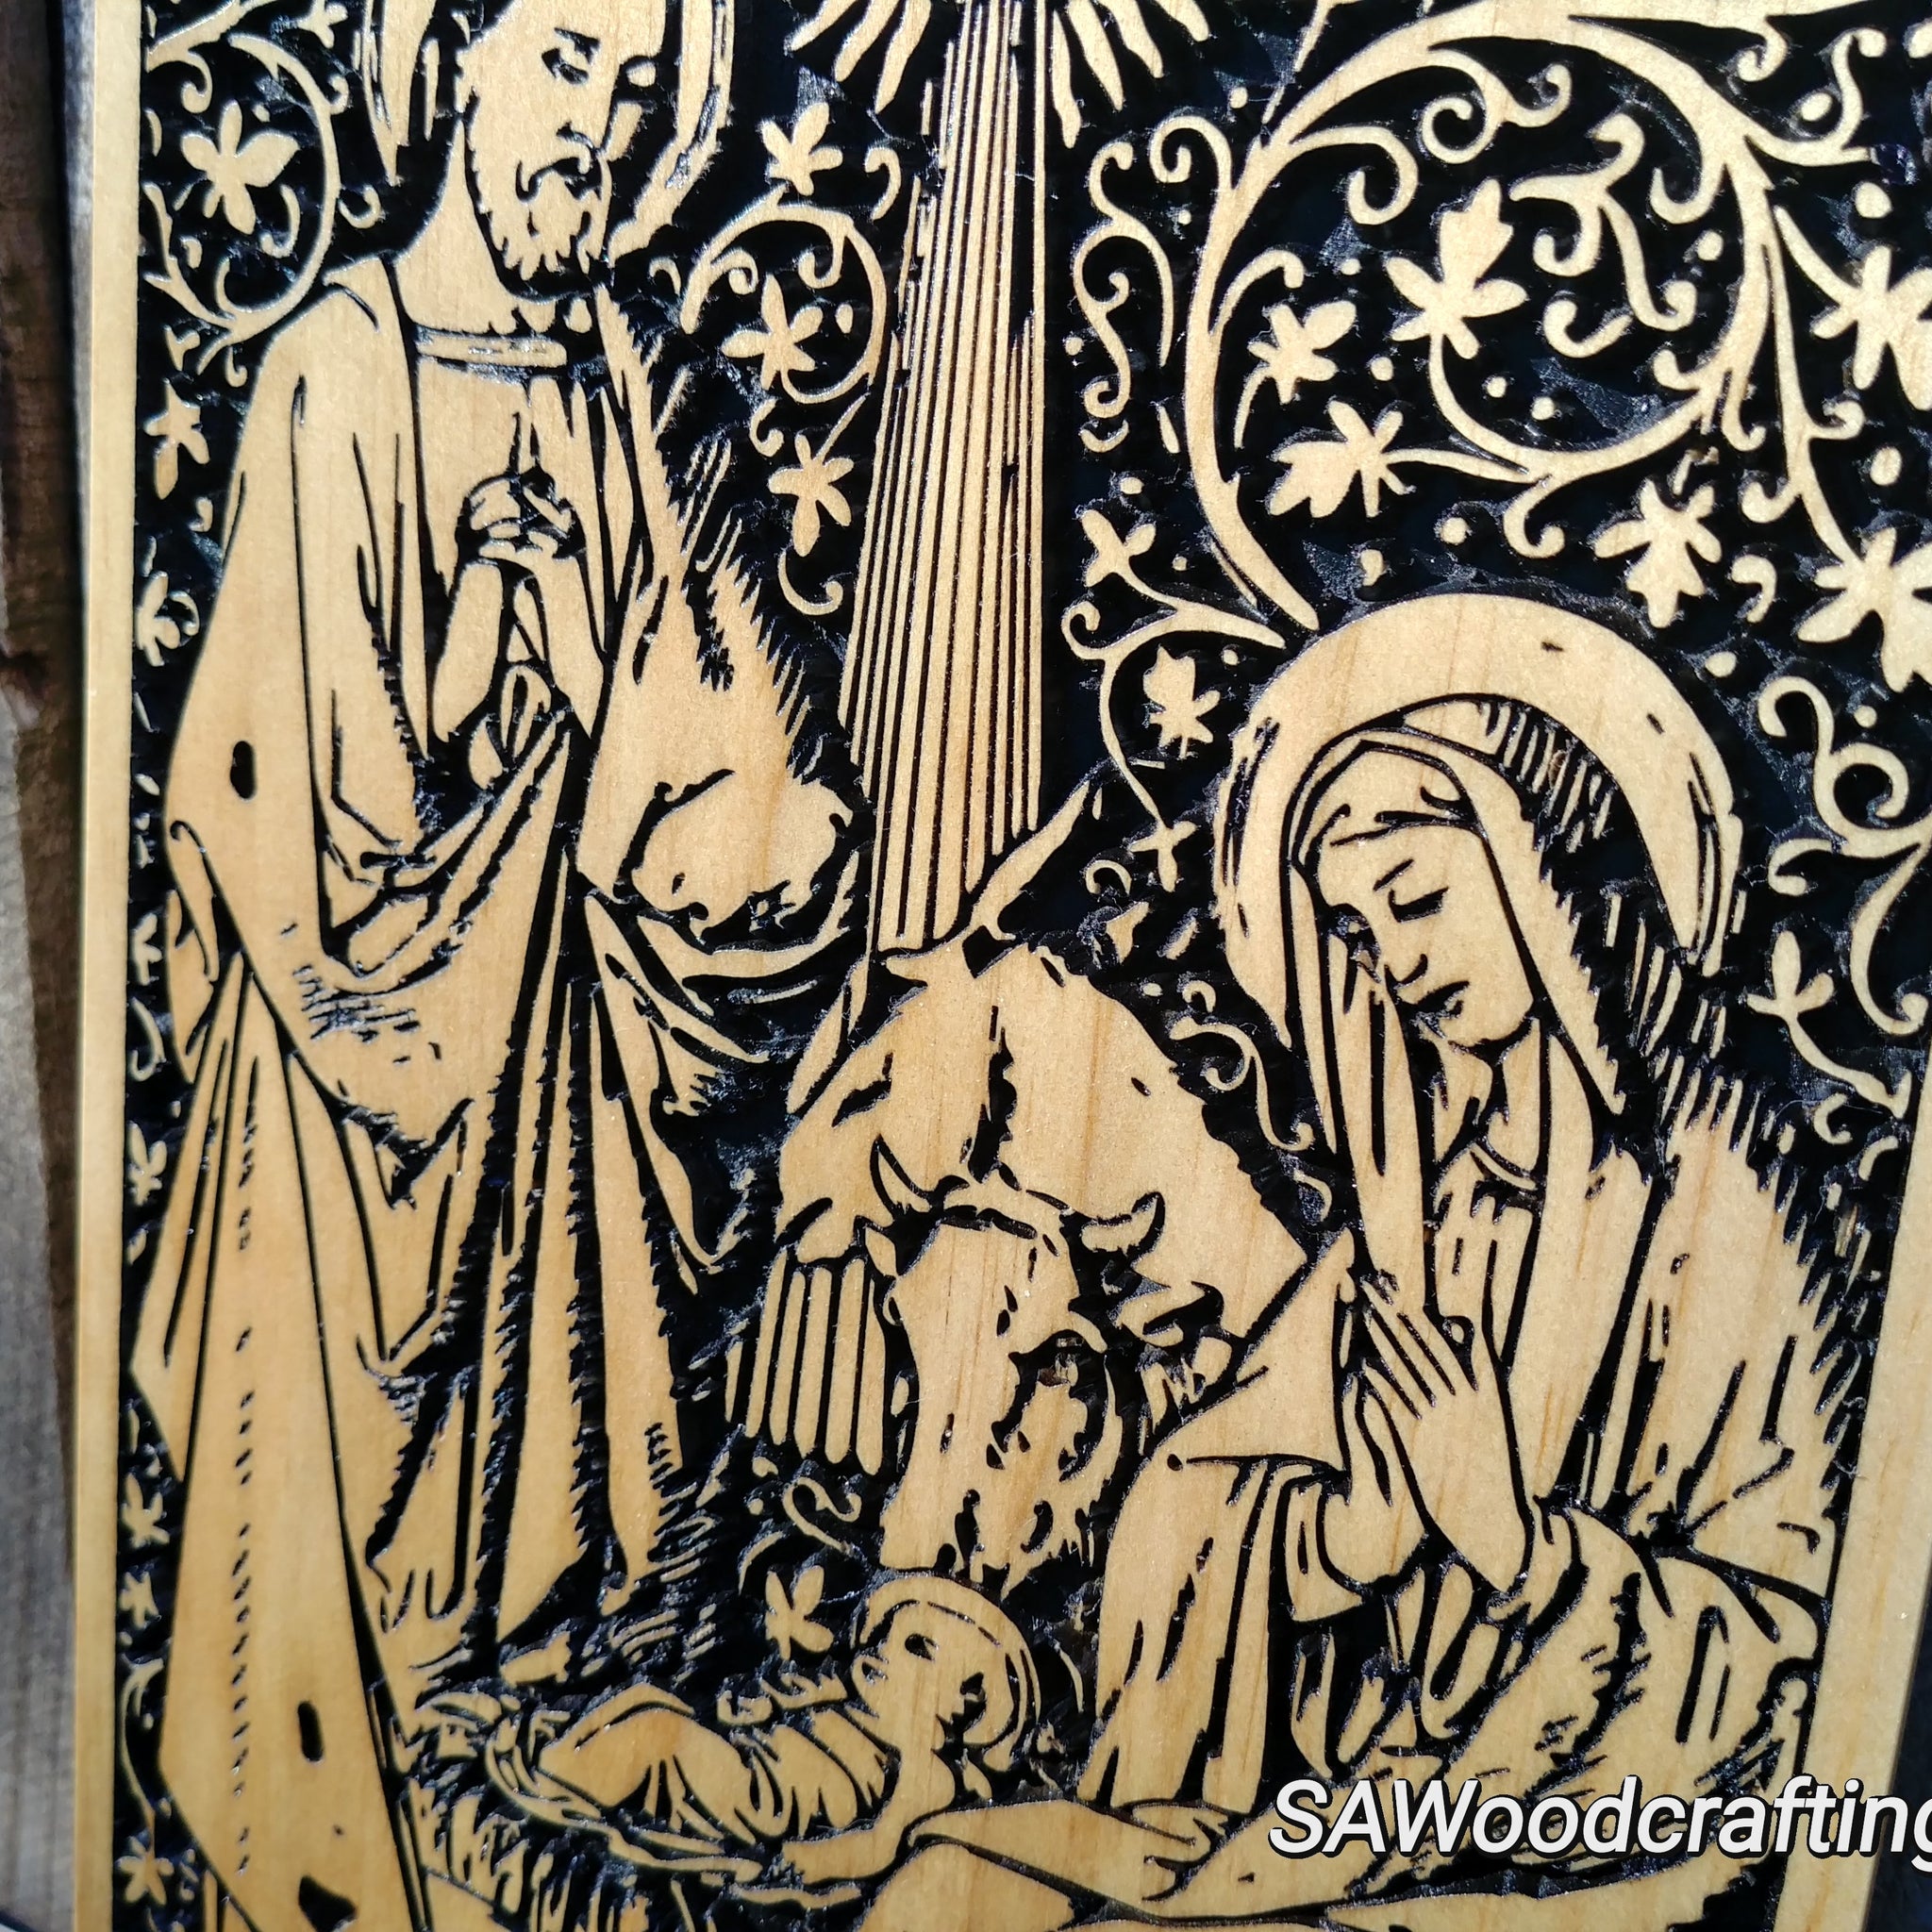 Christian gifts, wooden plaque with nativity scene, Christmas gift for a Christian woman 